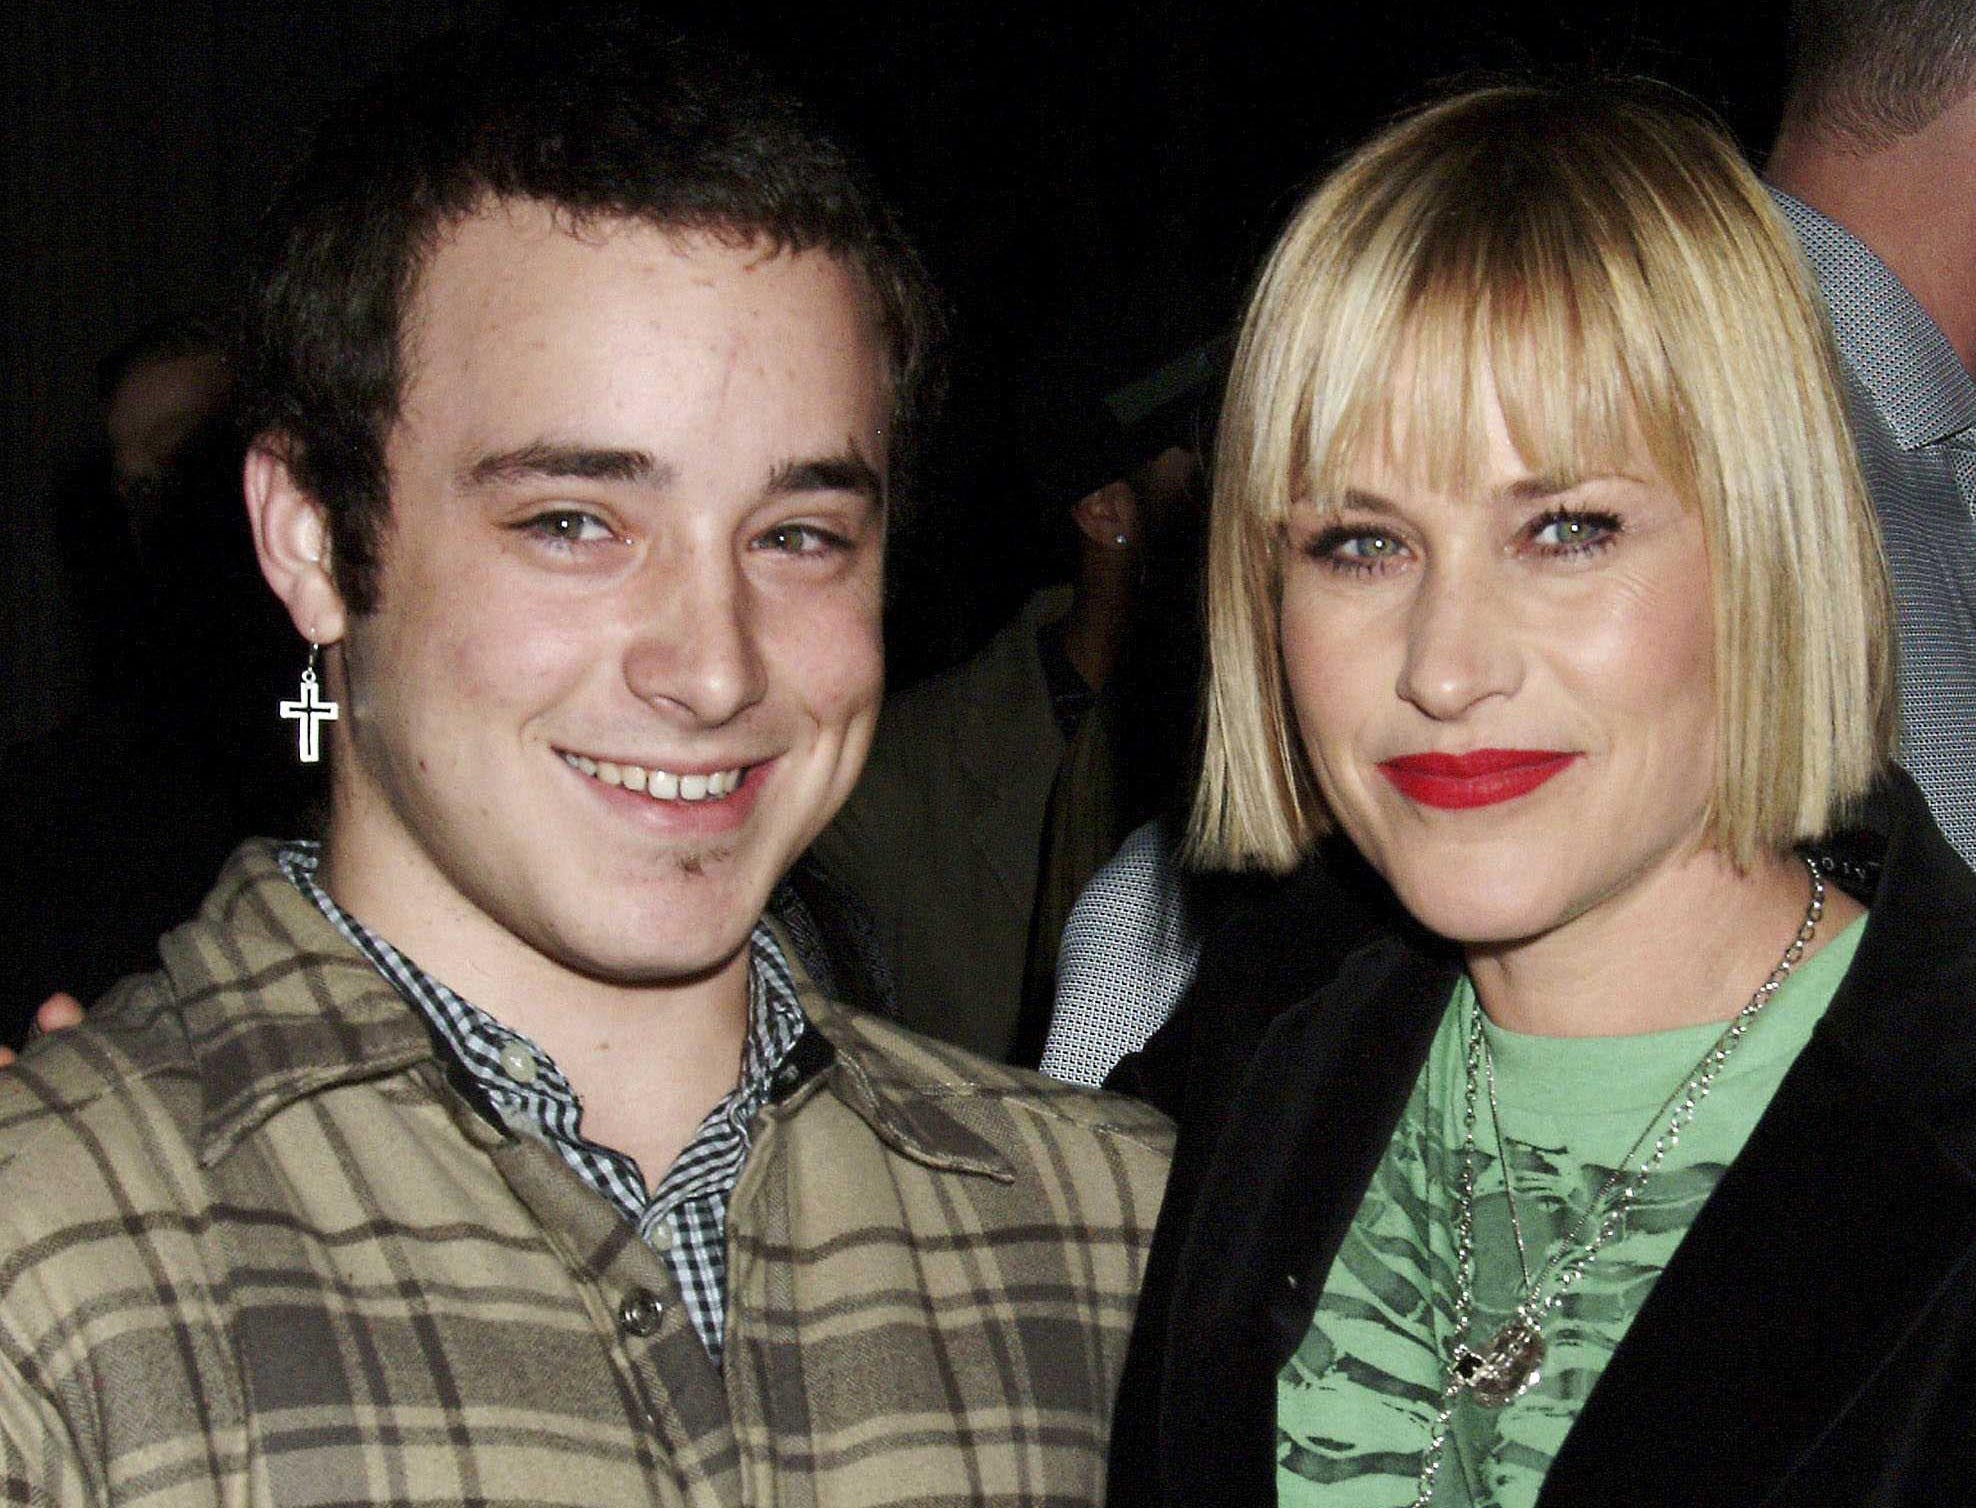 Patricia Arquette with her and Paul Rossi's son Enzo